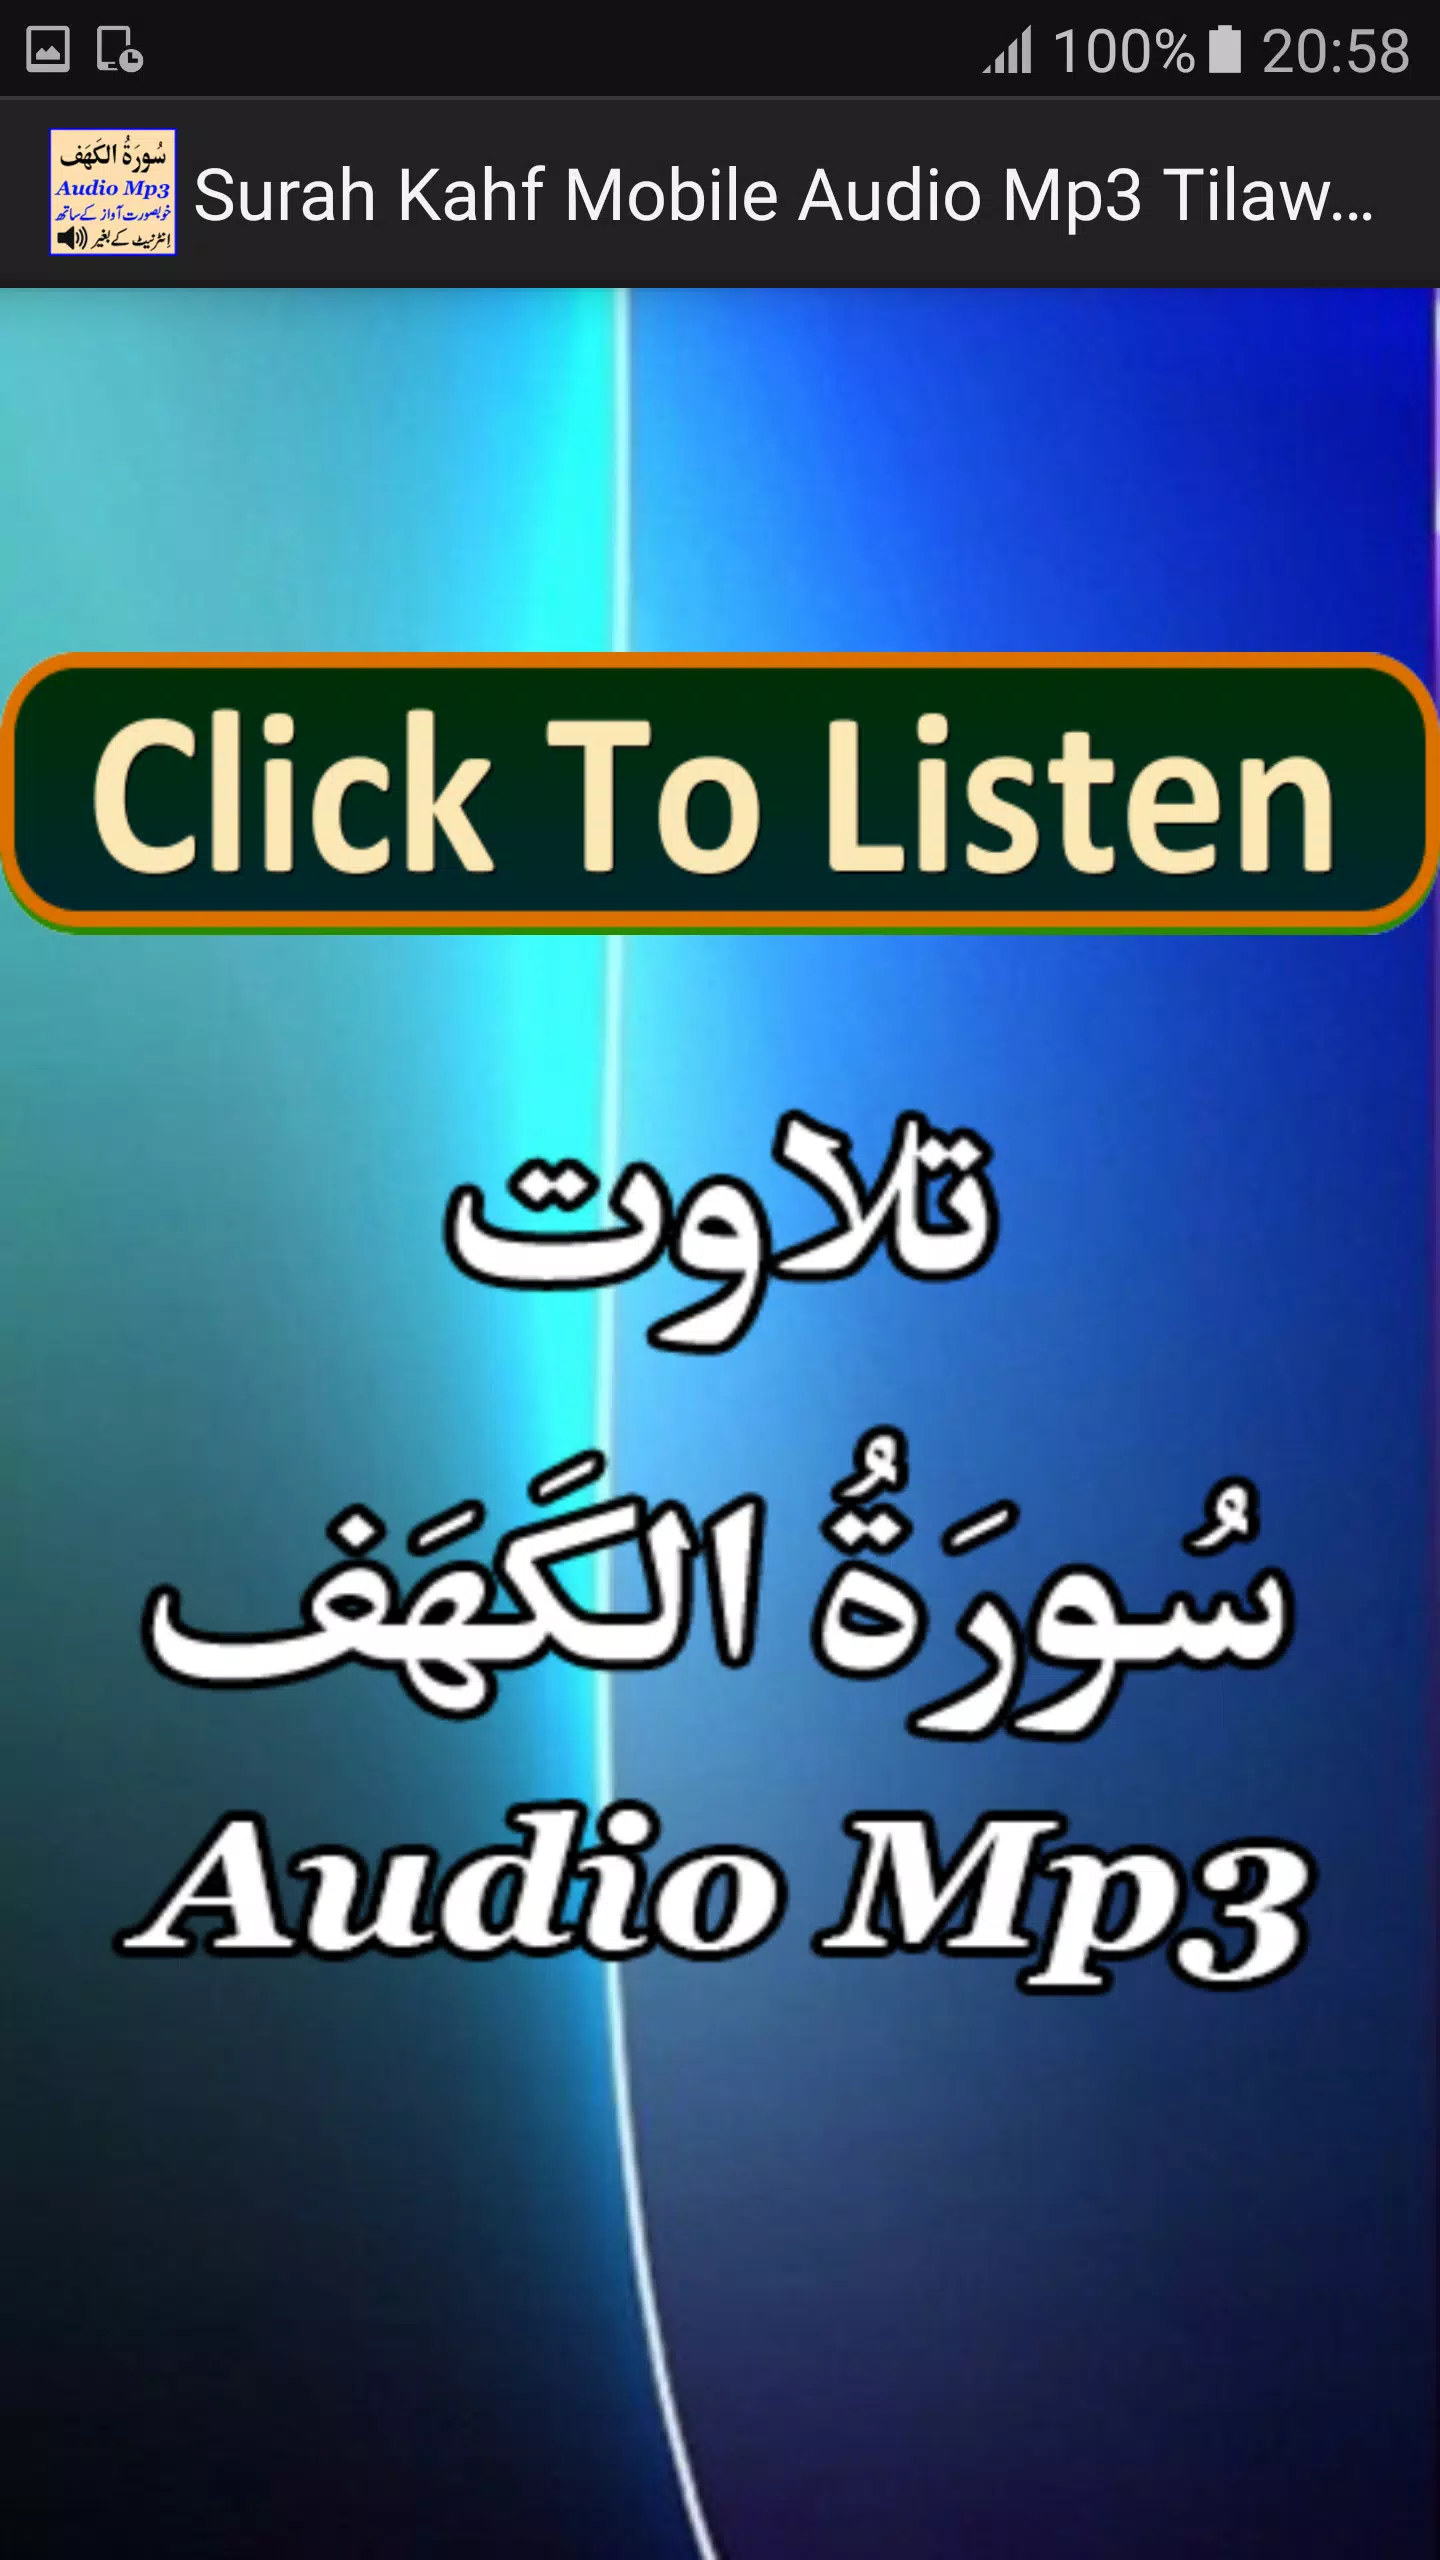 Surah Kahf Mobile Audio Mp3 for Android - APK Download